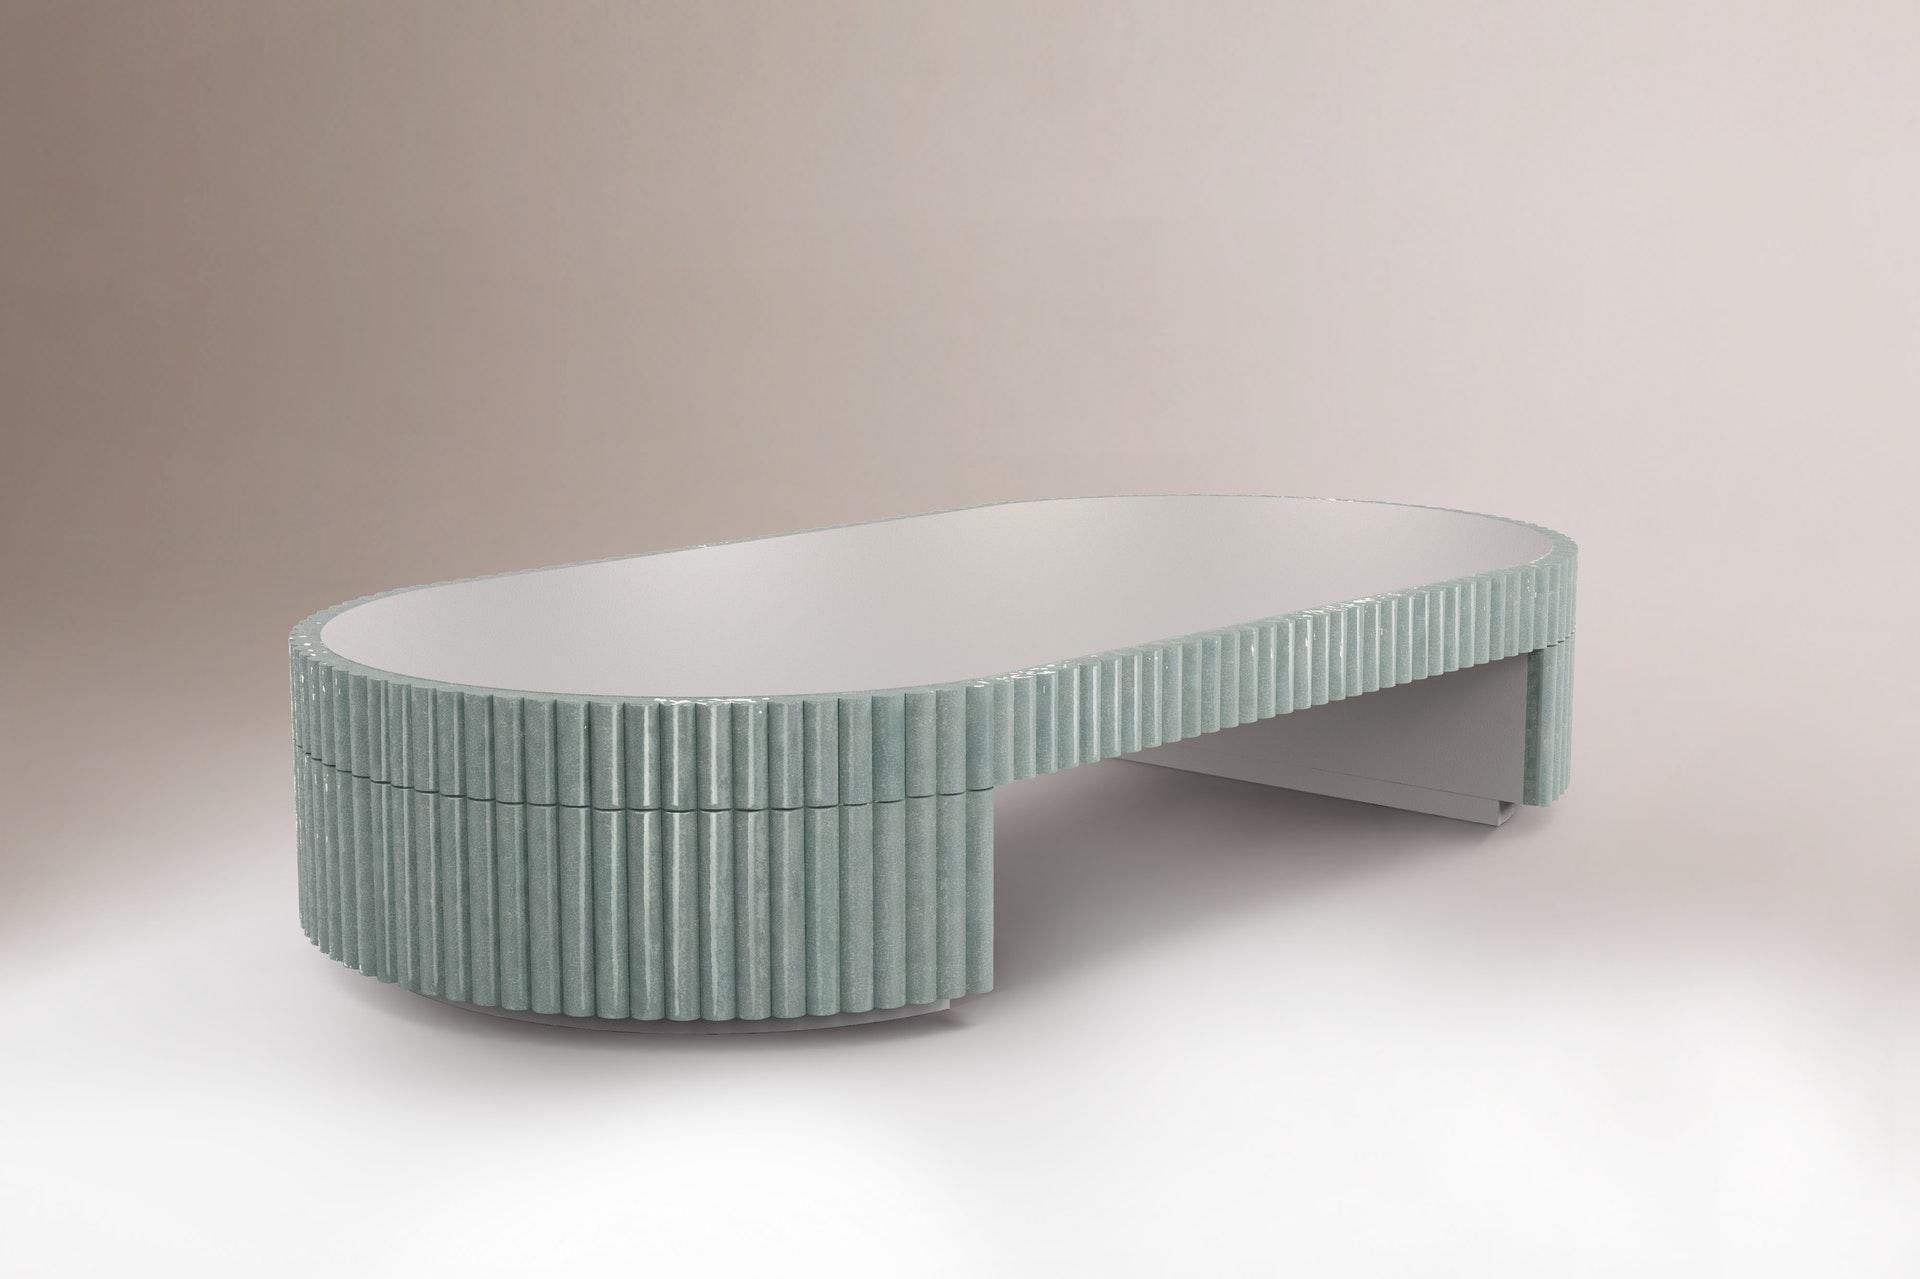 Nouvelle Vague center table by Dooq.
Measures: W 162 x D 82 cm x H 30 cm
Materials: Lacquered wood, Mar di Giava ceramic tiles.

Dooq is a design company dedicated to celebrate the luxury of living. Creating designs that stimulate the senses, whose